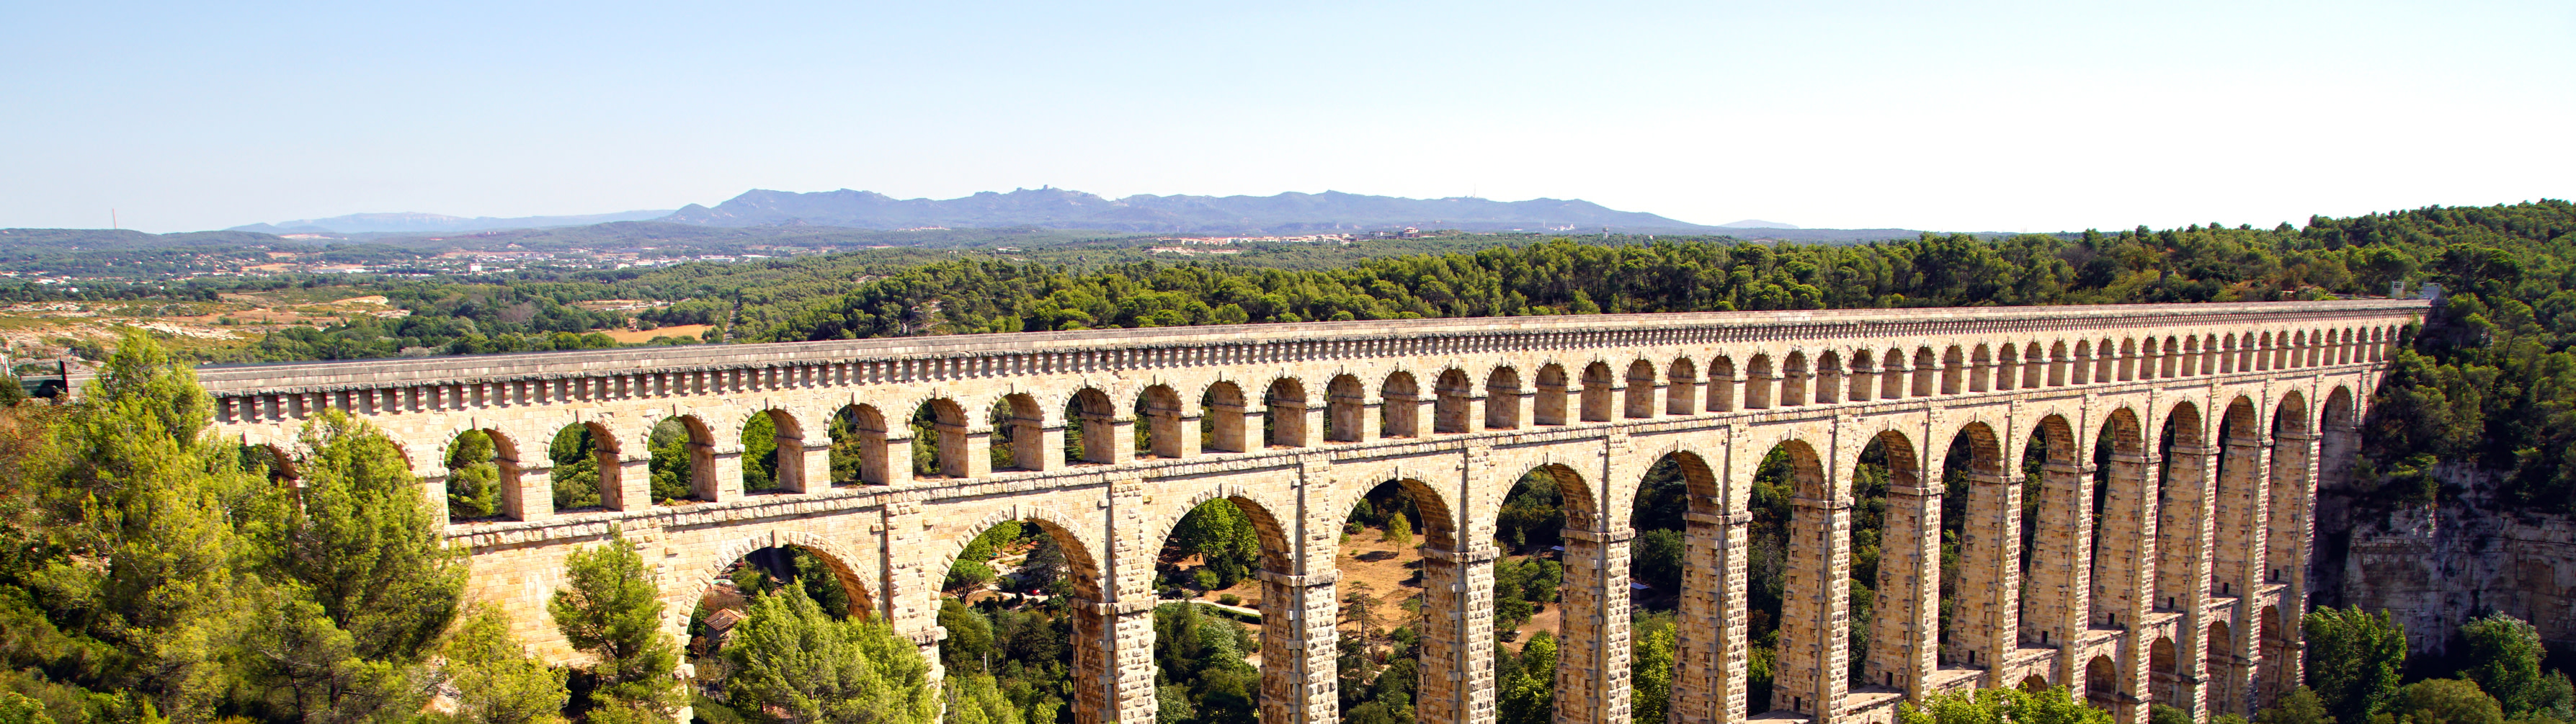 Beautiful Aix-en-Provence, near Marseille, with an aquaduct stretching between dusty brown hills.